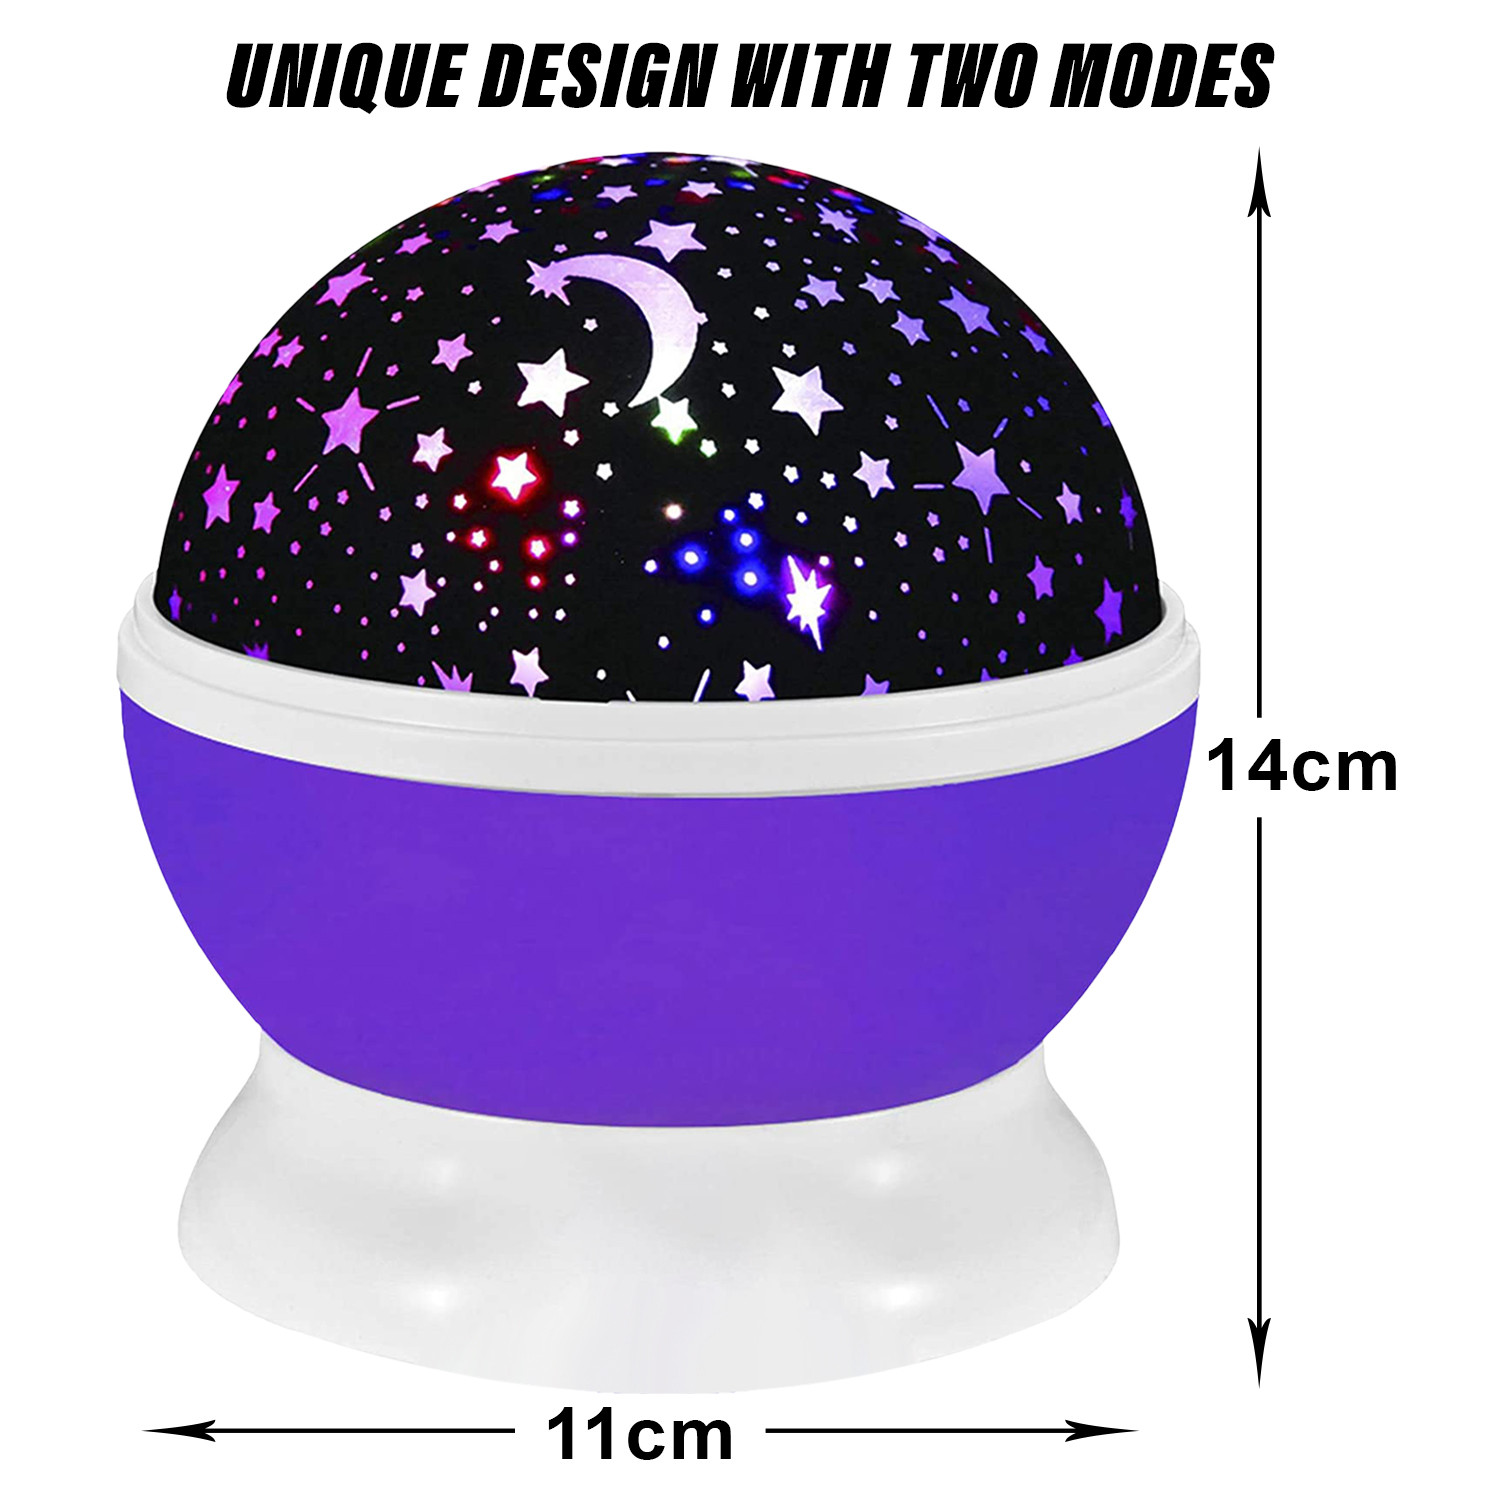 Kuber Industries Star Master | Plastic Rotating 360 Degree Moon Night Light Lamp | Projector with Colors and USB Cable | Lamp for Kids Room | Night Lamp for Home Décor | Purple